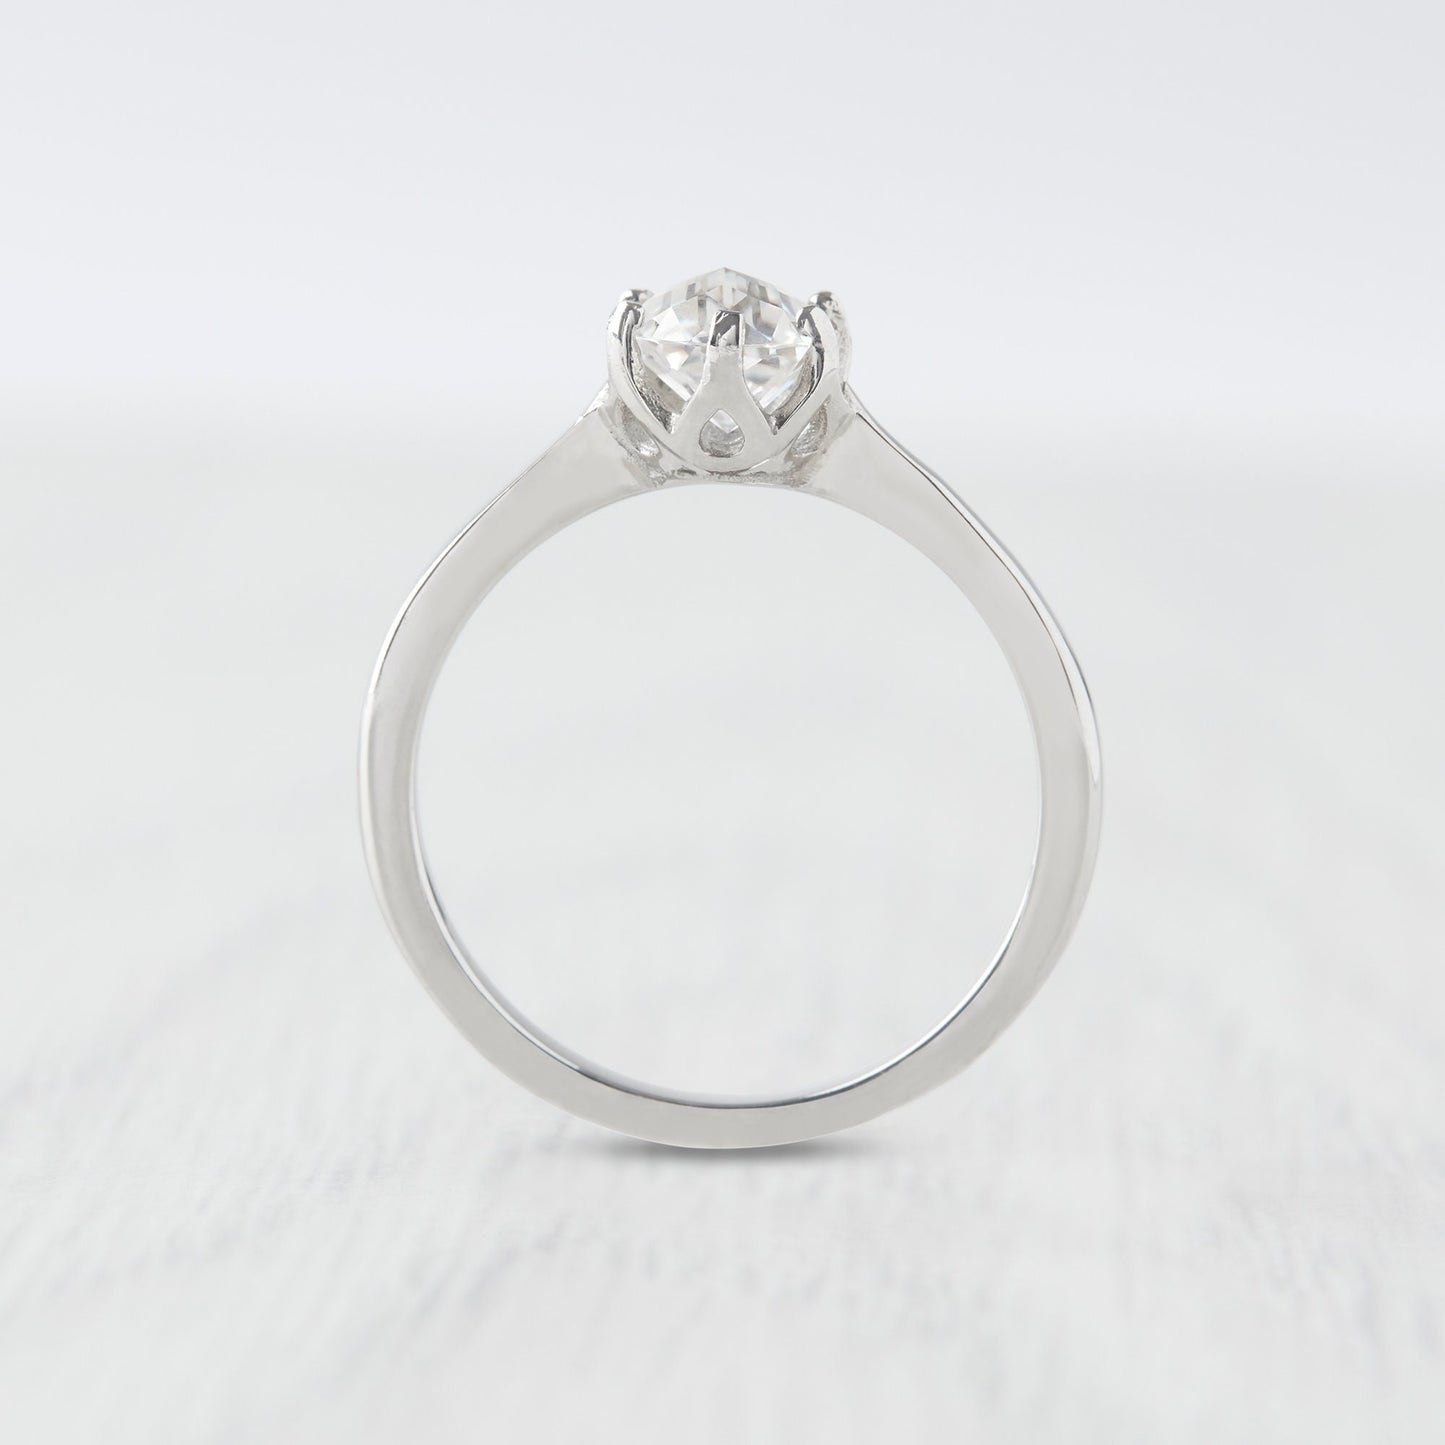 Jubilee Cut 1ct Moissanite Solitaire ring available in white gold or titanium - engagement ring - hand made